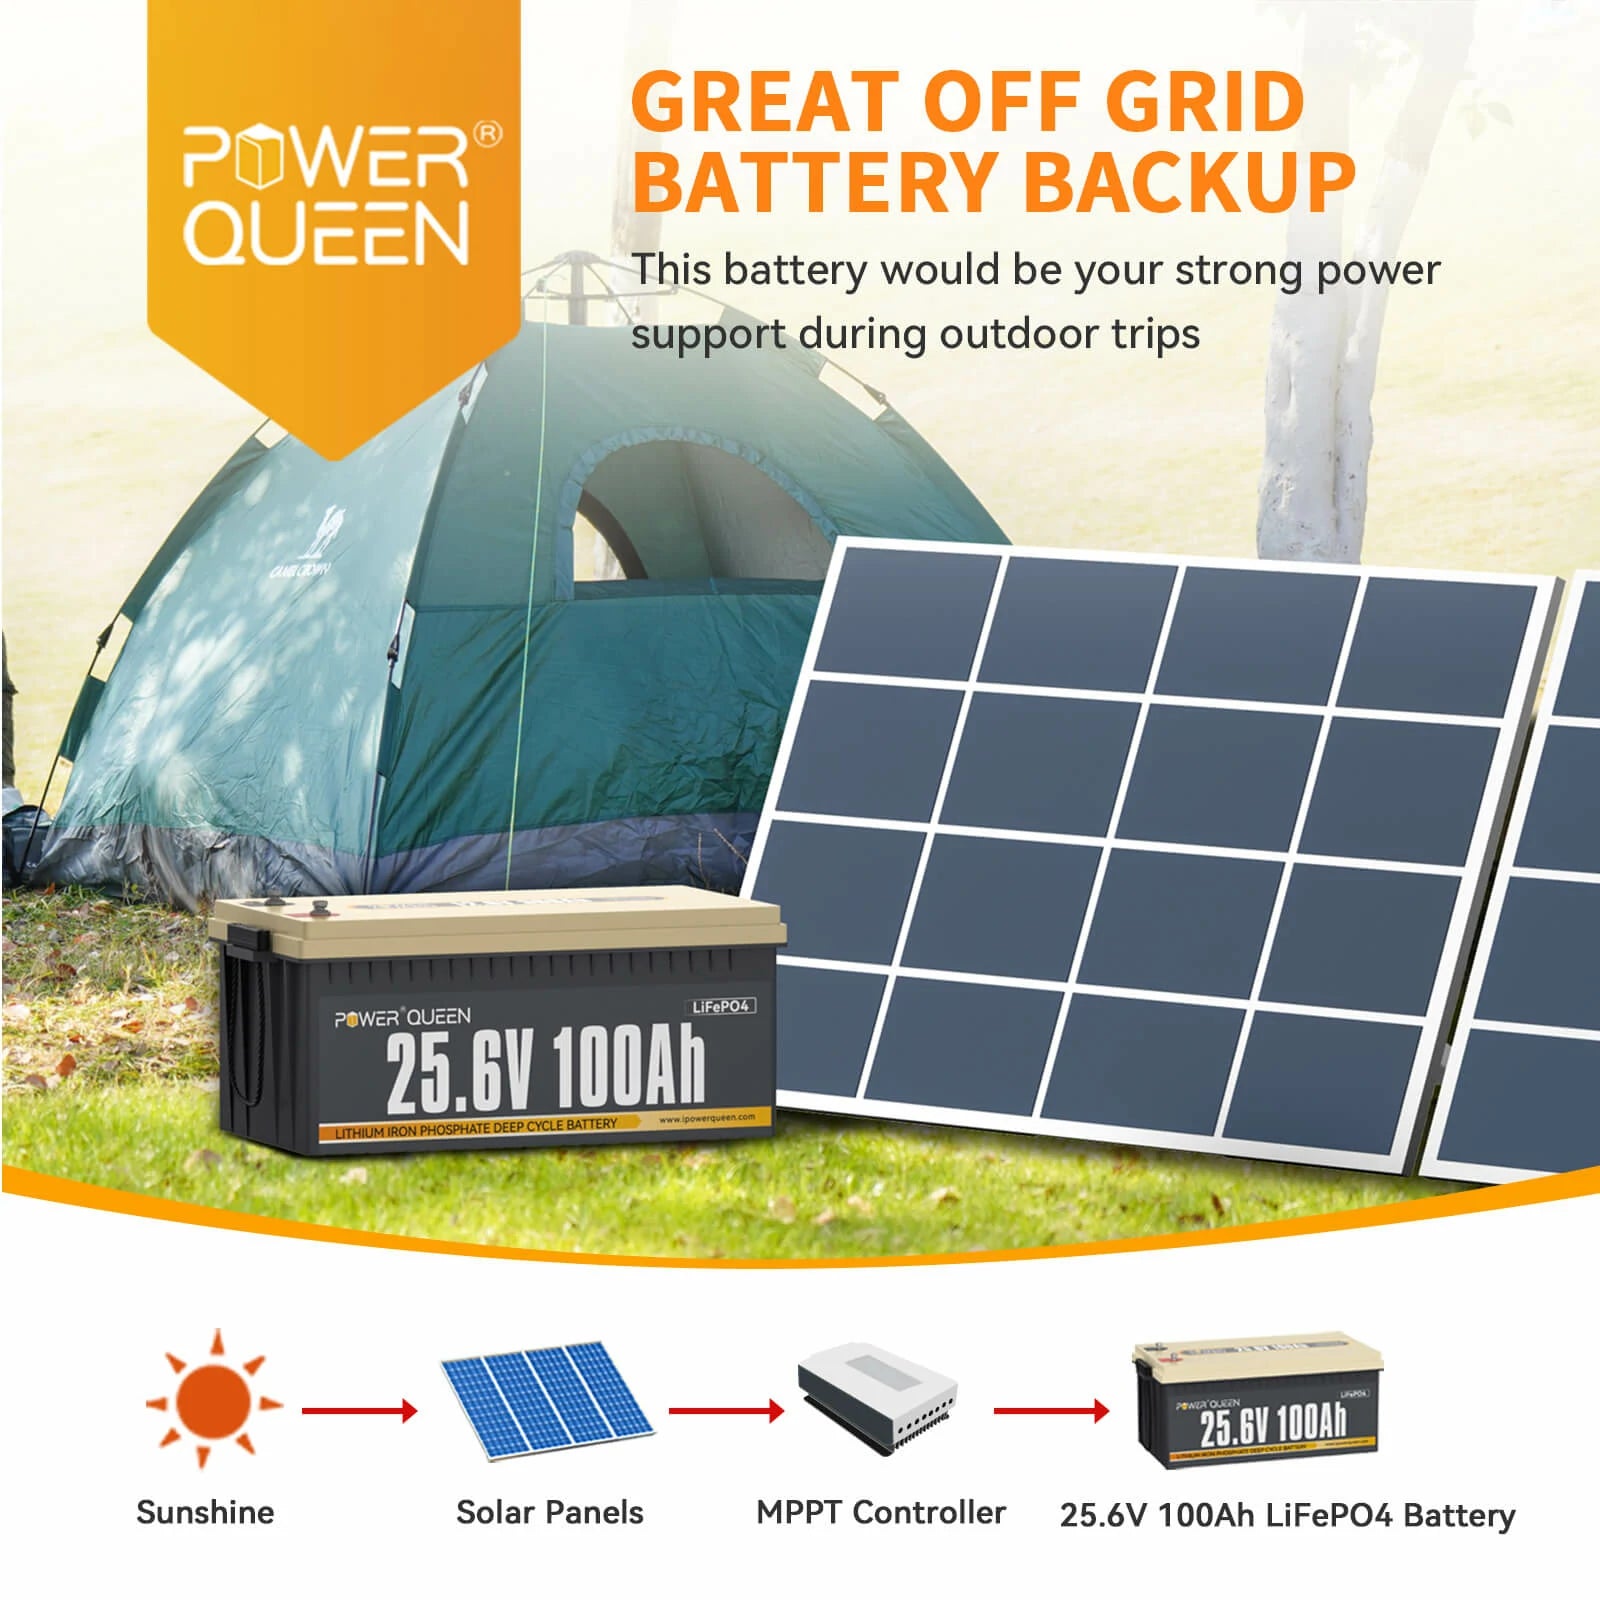 Power-Queen-24volt-100Ah-Lithium-iron-phosphate-battery-design-for-off-grid-live